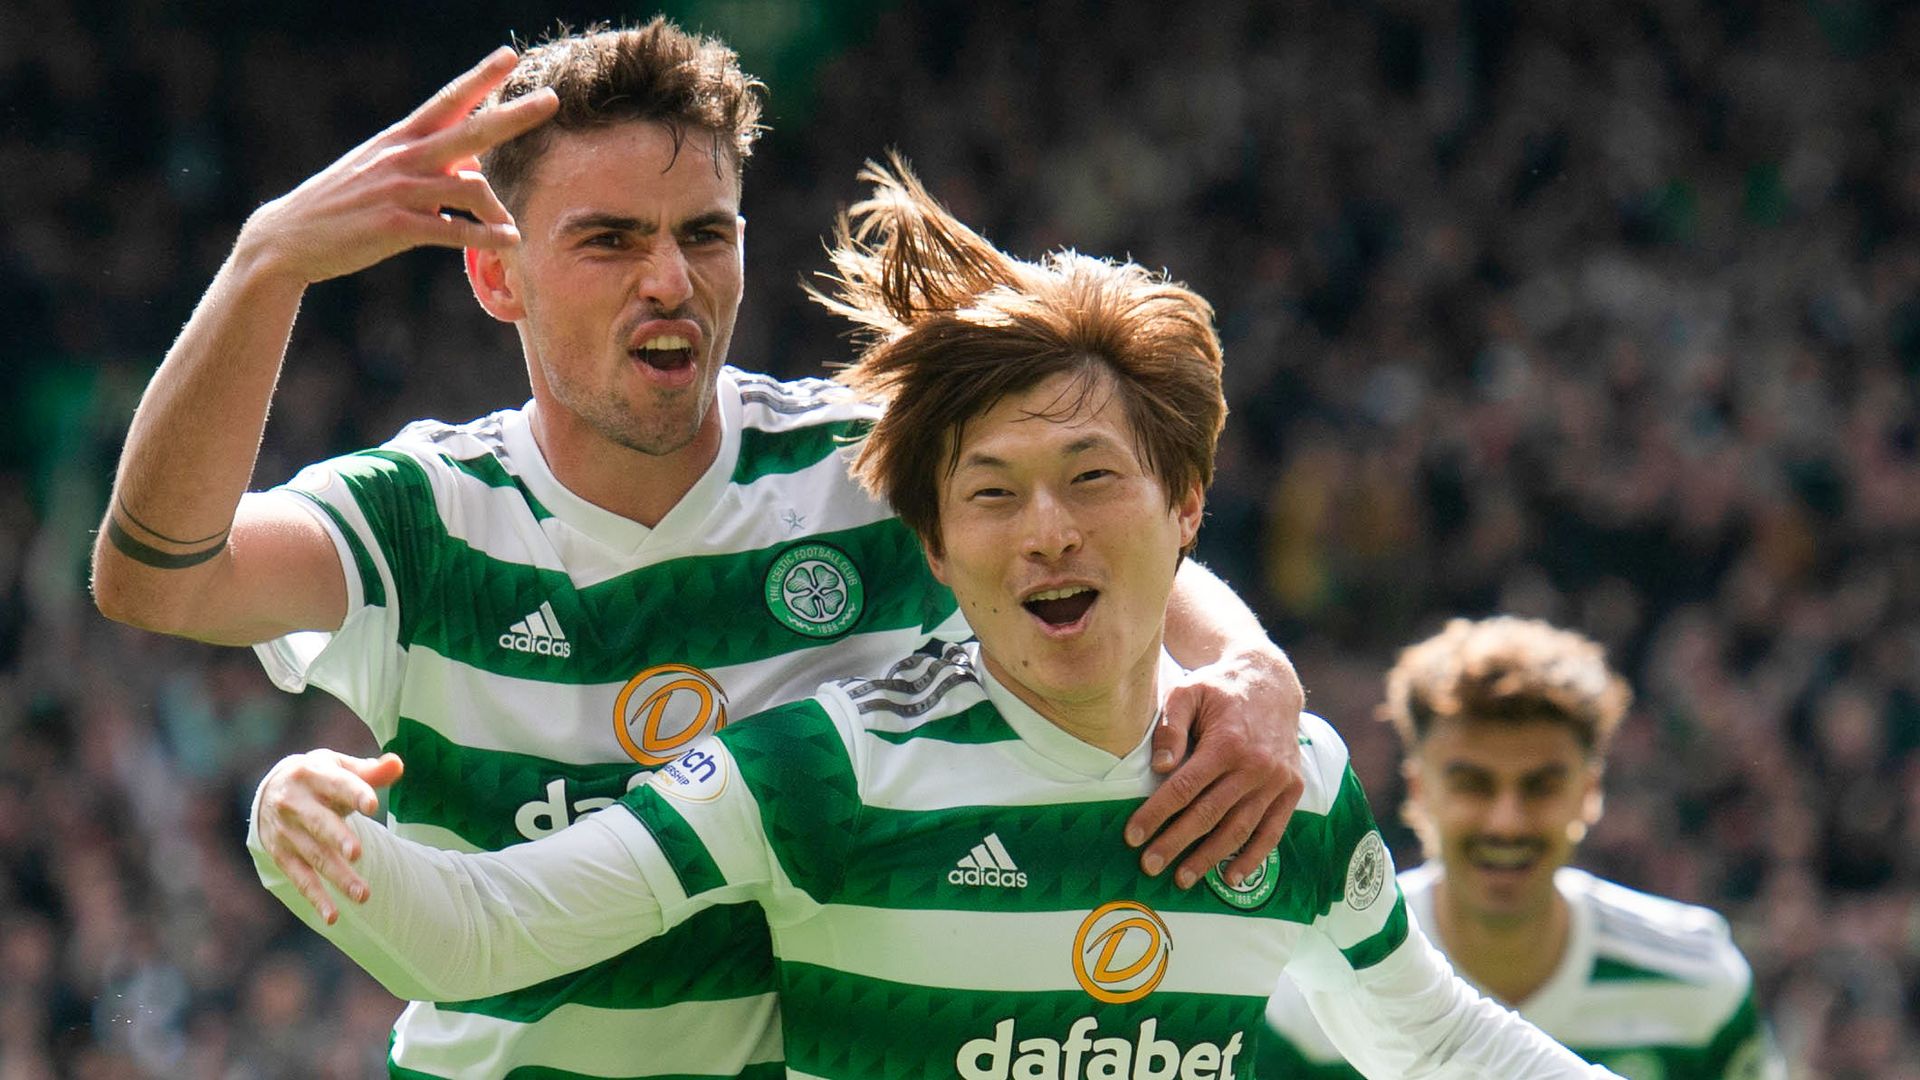 Celtic 12 points clear after Old Firm thriller